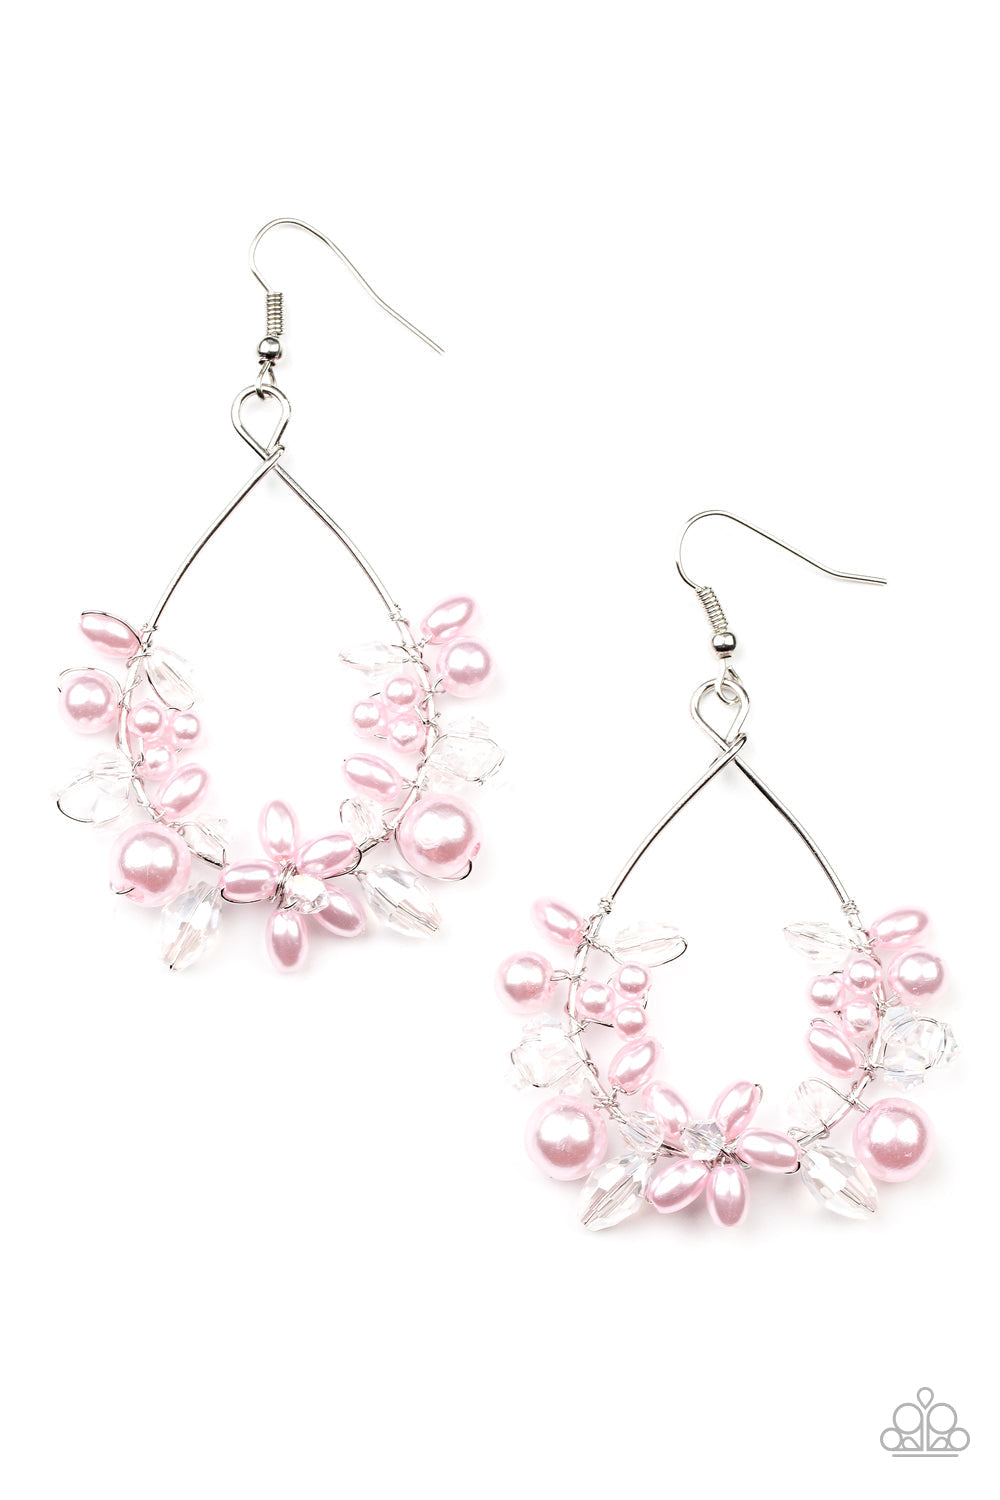 Marina Banquet - Pink Pearl - Floral Silver Earrings - Paparazzi Accessories - A bubbly collection of pink pearls and white crystal-like beads are threaded along the bottom of a dainty wire hoop, creating twinkly floral accents. Earring attaches to a standard fishhook fitting. 